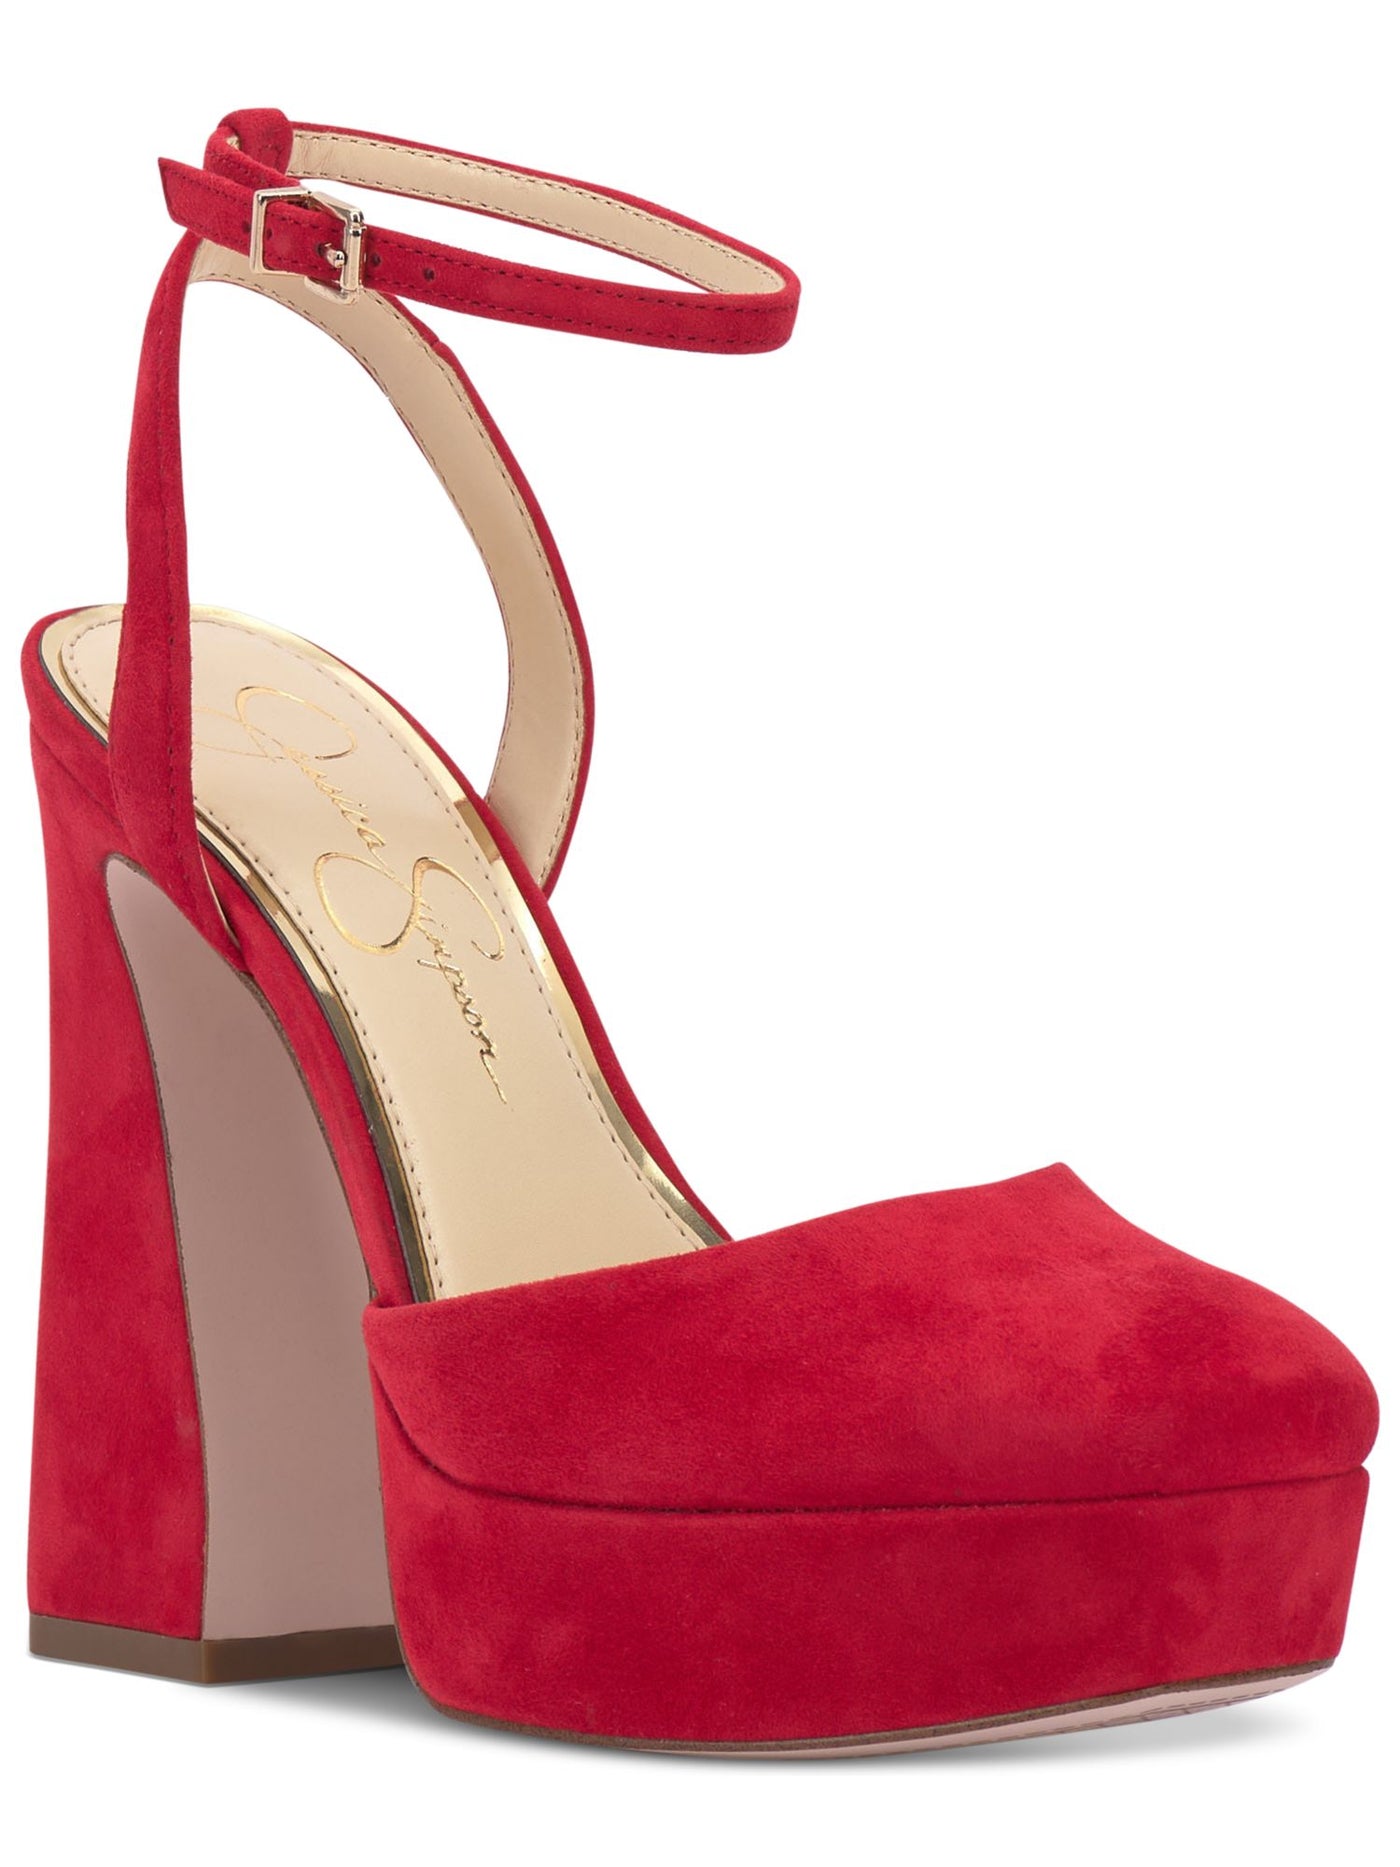 JESSICA SIMPSON Womens Red 1" Platform Adjustable Ankle Strap Deirae Round Toe Sculpted Heel Buckle Leather Dress Pumps Shoes 10 M